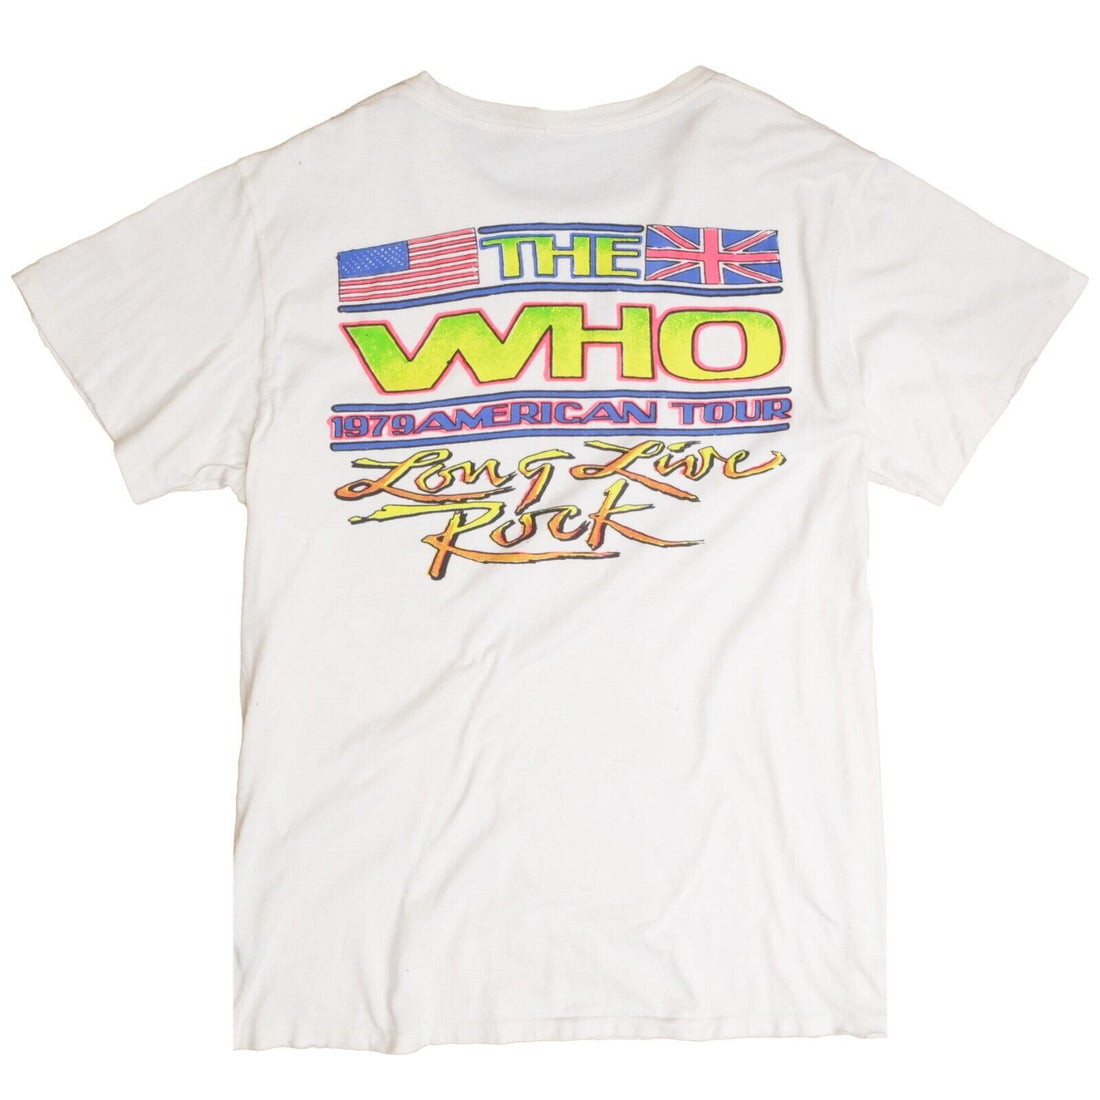 Vintage The Who The Kids Are Alright Long Live Rock Tour T-Shirt Size Large 1979